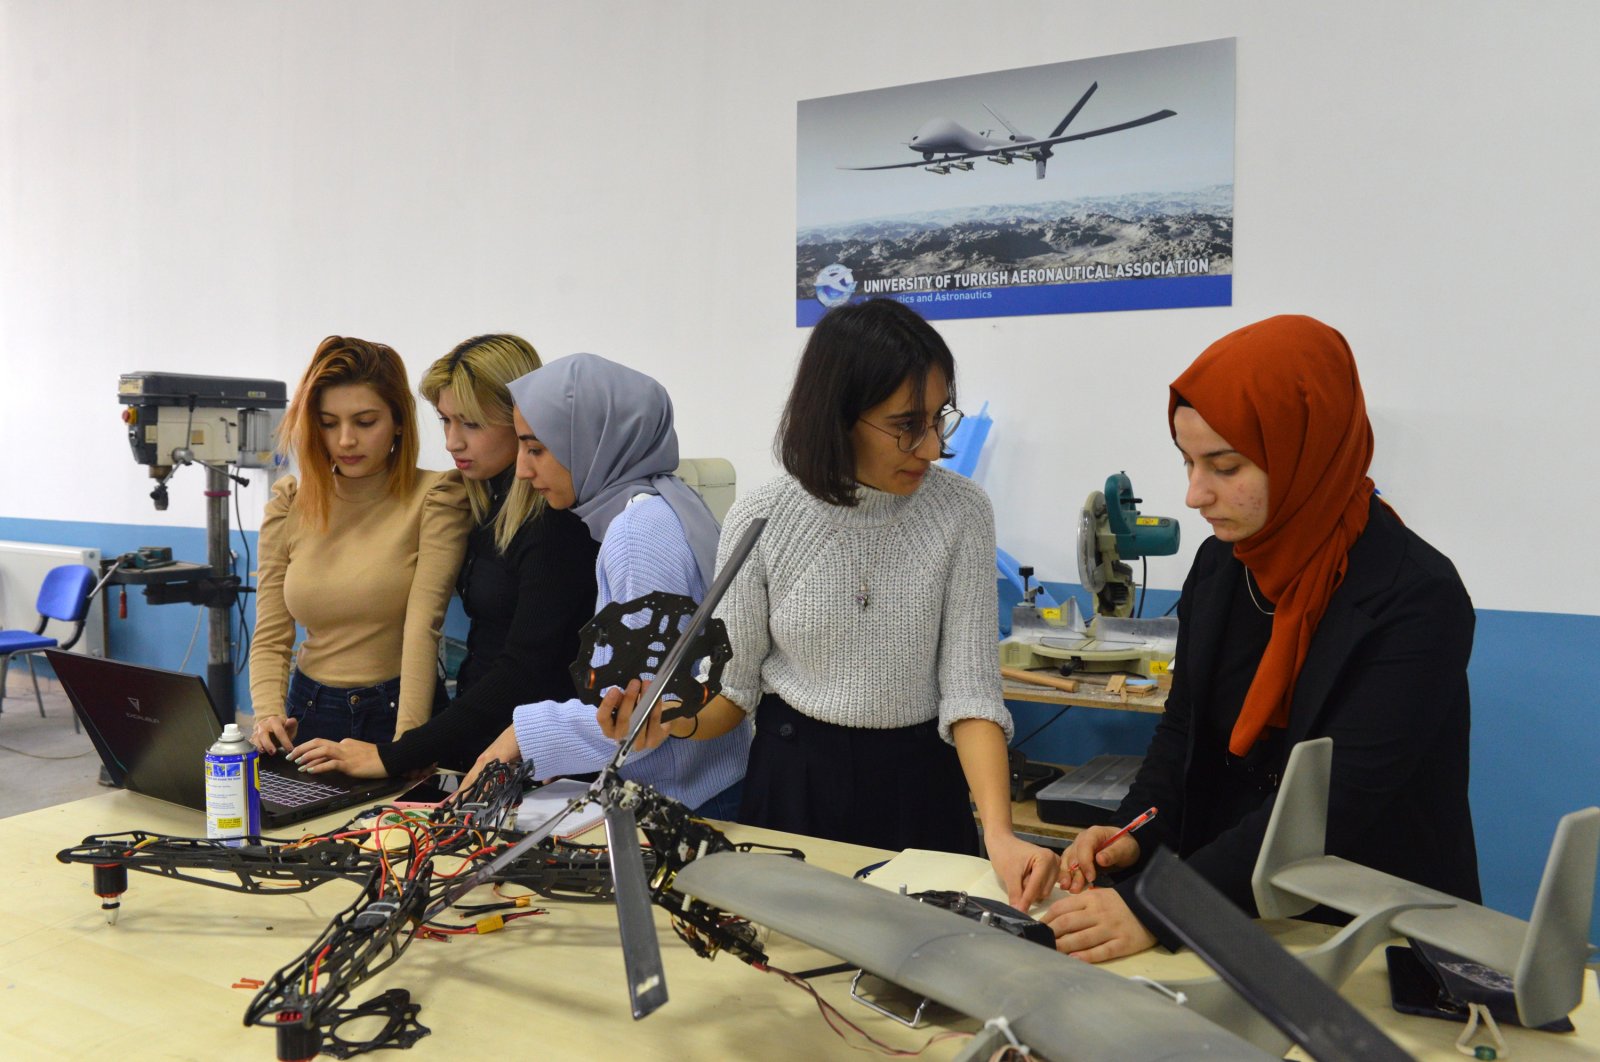 Students work on the drone at the university in the capital Ankara, Turkey, March 1, 2022. (DHA PHOTO)